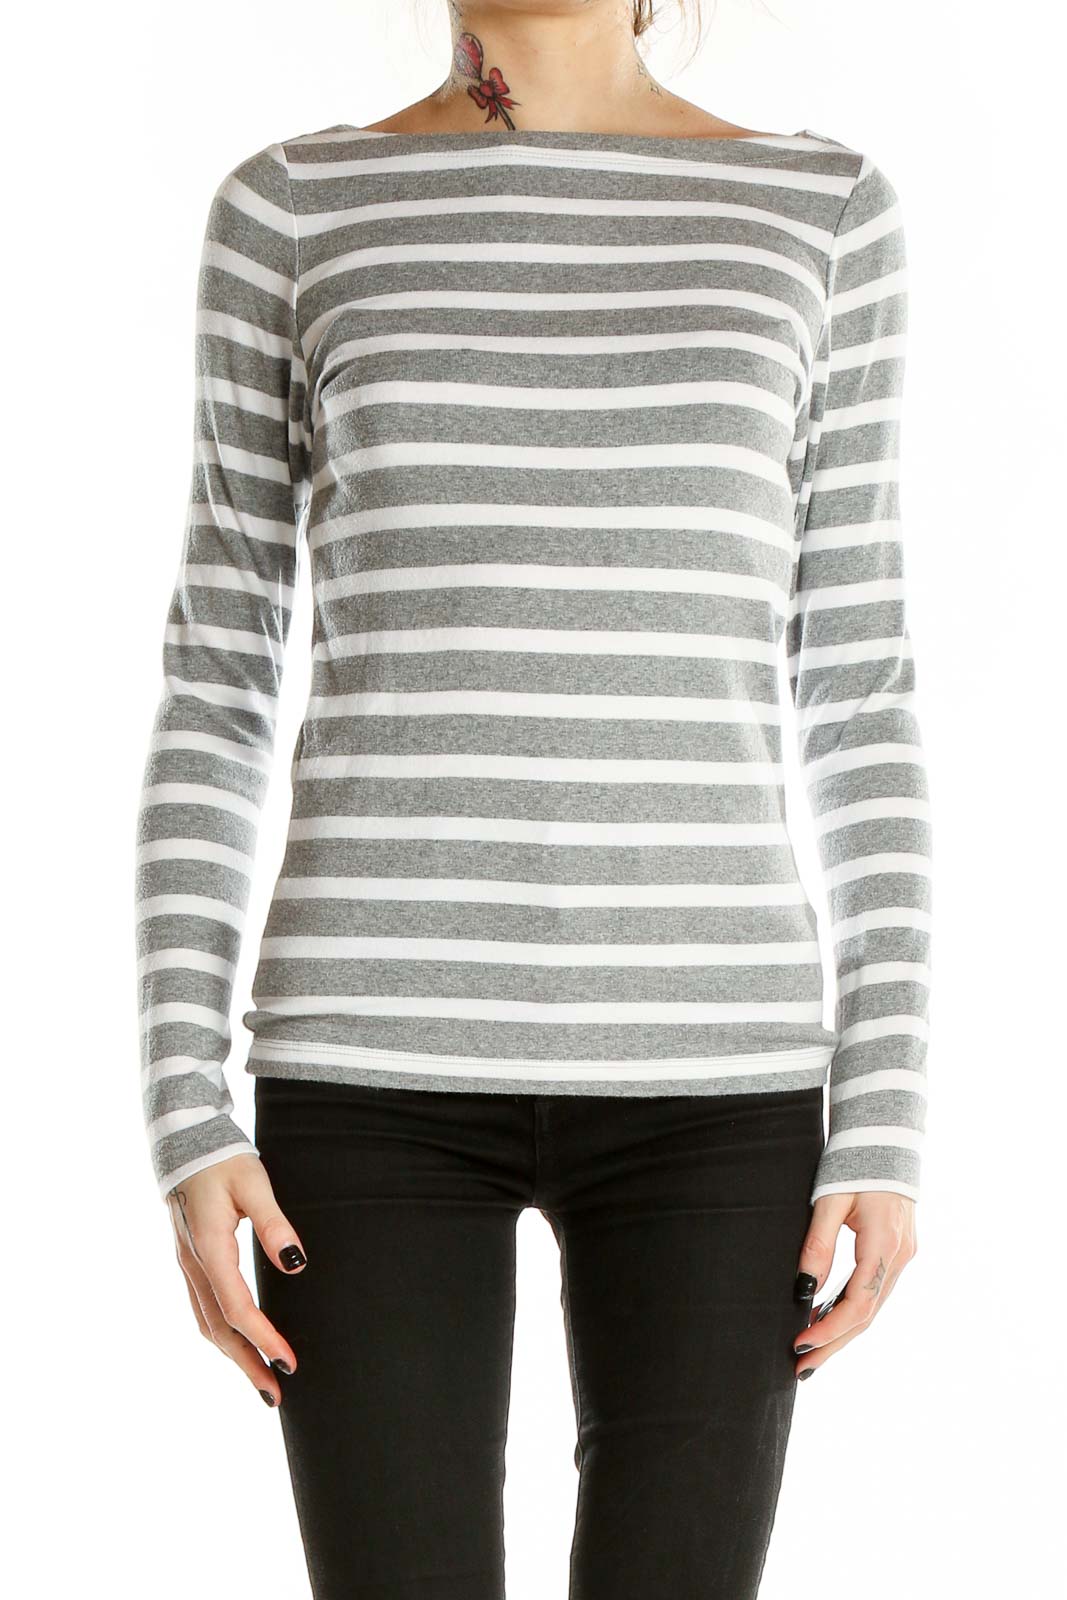 Grey White Long Sleeve Striped Shirt Front